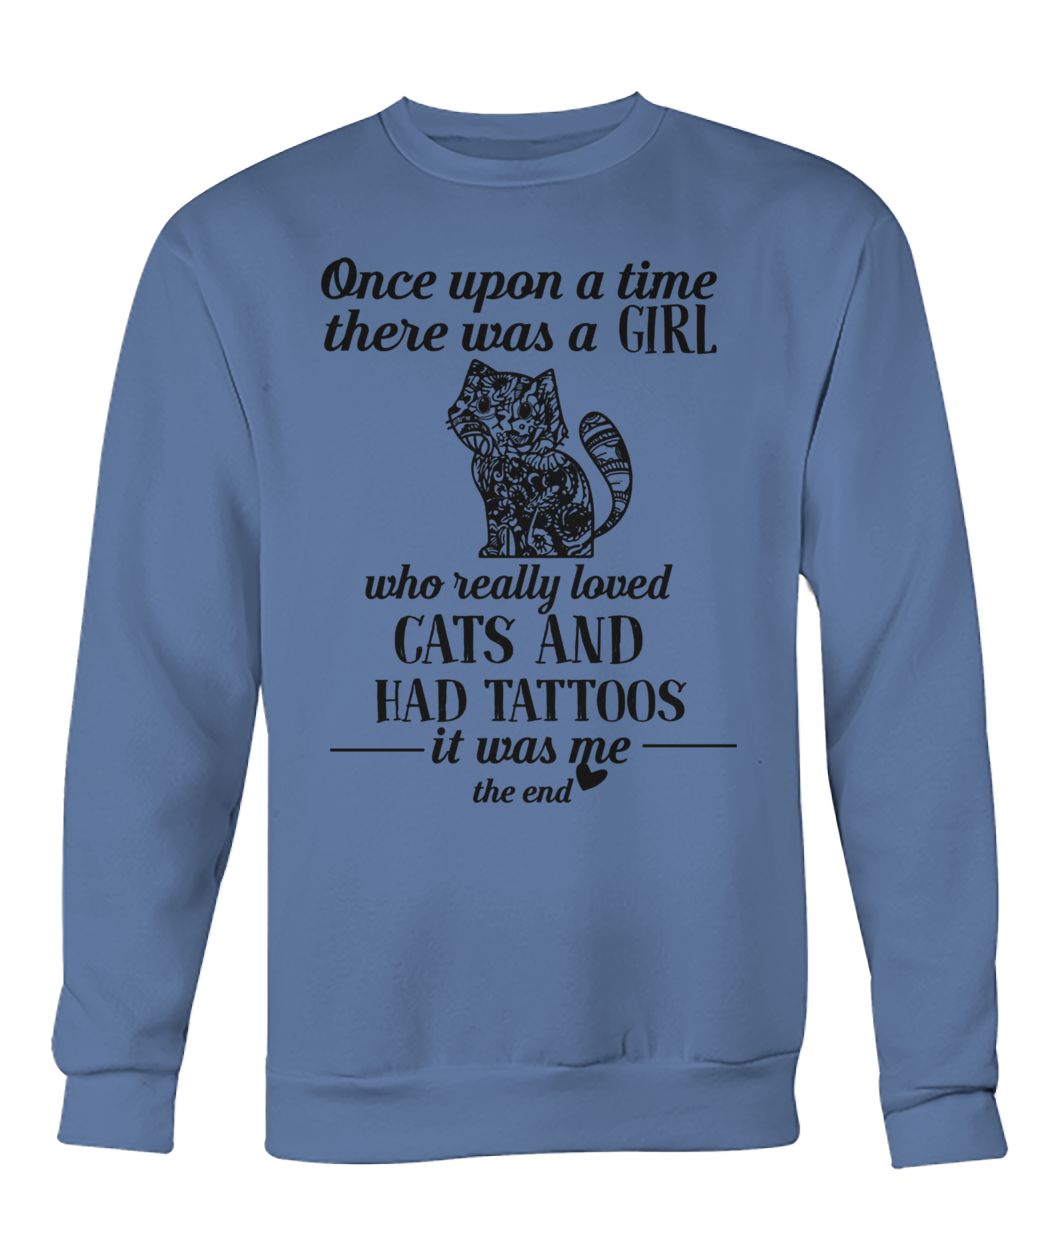 Once upon a time there was a girl who really loved cats and had tattoos it was me crew neck sweatshirt